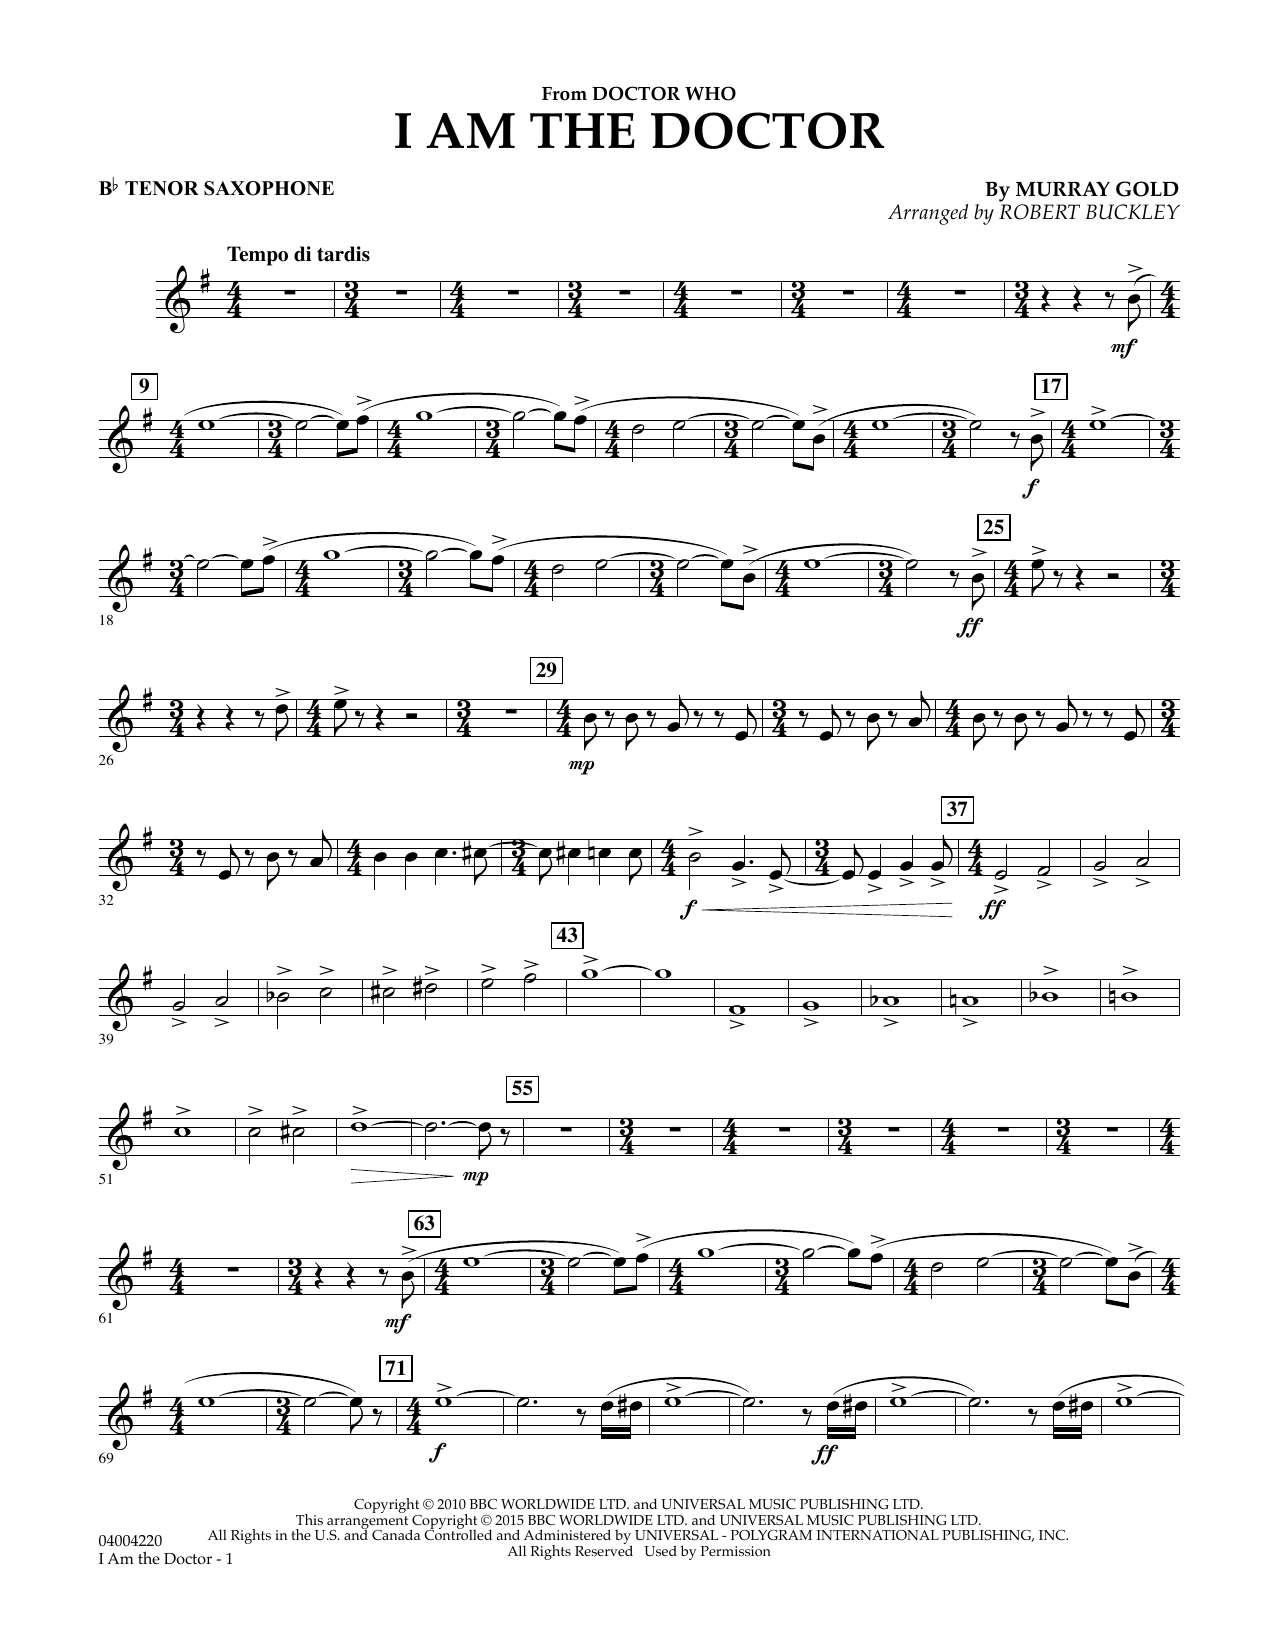 Robert Buckley I Am the Doctor (from Doctor Who) - Bb Tenor Saxophone sheet music notes and chords. Download Printable PDF.